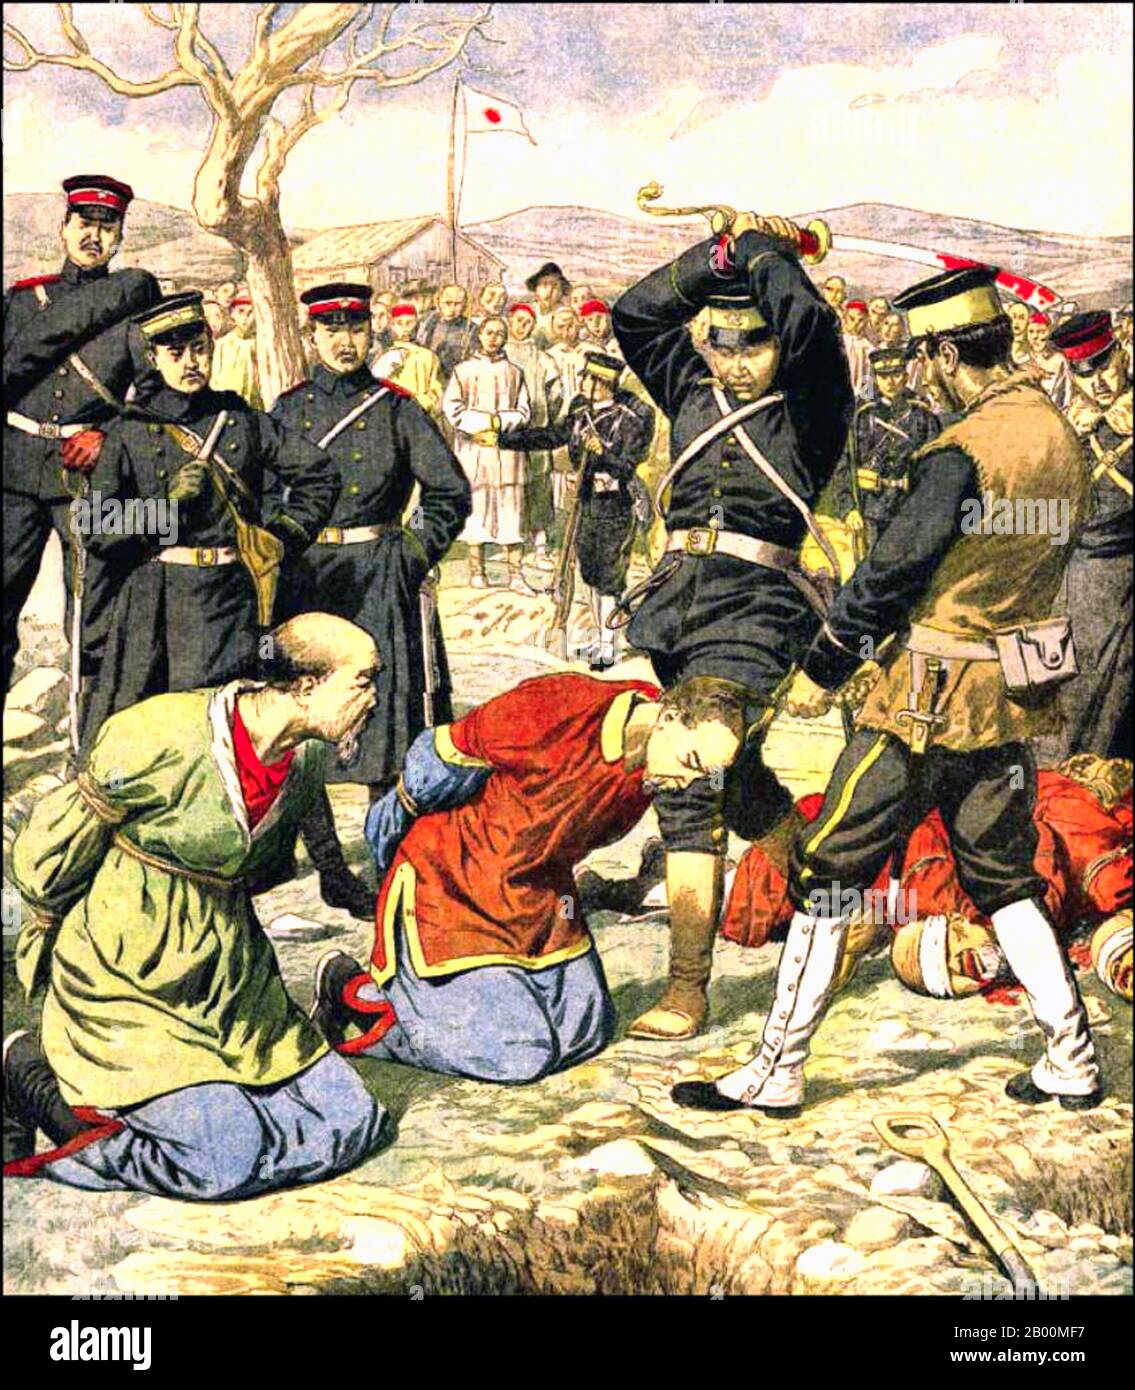 Grčki guverner: Izraelsko-palestinski sukob mogao bi raspiriti inflaciju u EU China-japanese-soldiers-beheading-chinese-citizens-suspected-of-russian-sympathies-near-mukden-shenyang-illustration-fro-le-petit-journal-april-1905-the-russo-japanese-war-8-february-1904-5-september-1905-was-the-first-great-war-of-the-20th-century-which-grew-out-of-the-rival-imperial-ambitions-of-the-russian-empire-and-japanese-empire-over-manchuria-and-korea-the-resulting-campaigns-in-which-the-japanese-military-attained-victory-over-the-russian-forces-arrayed-against-them-were-unexpected-by-world-observers-2B00MF7